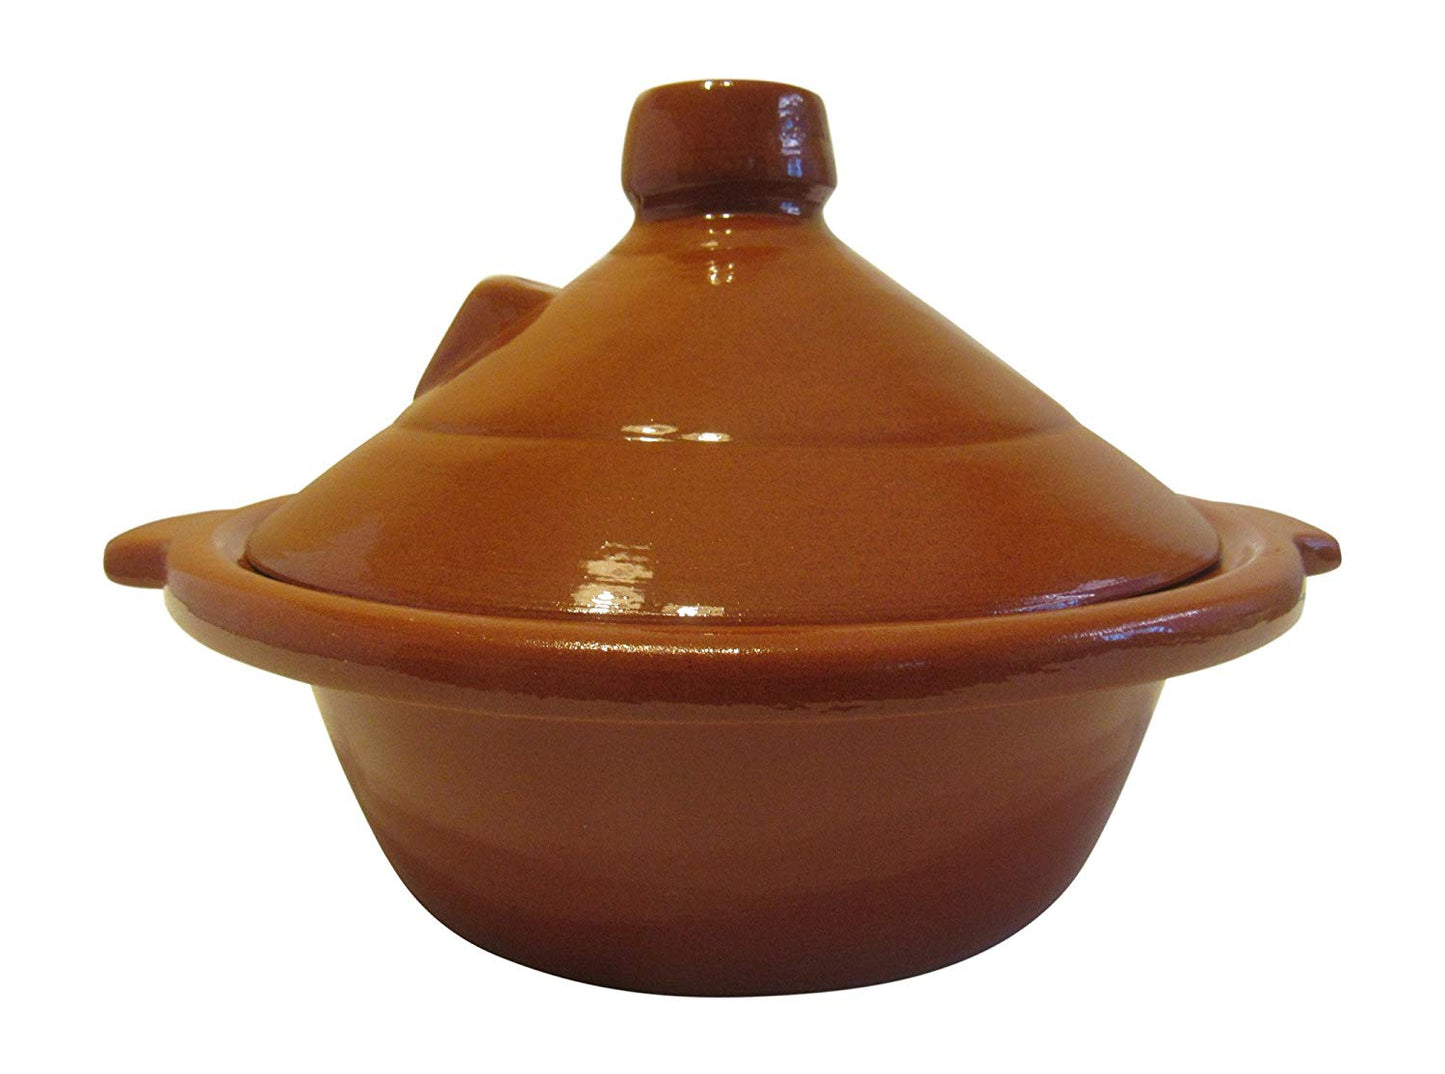 Handmade Authentic Moroccan Berber Ceramic Cooking and Serving Tagine, Large 12" D x 9 1/2"H - Marrakesh Gardens